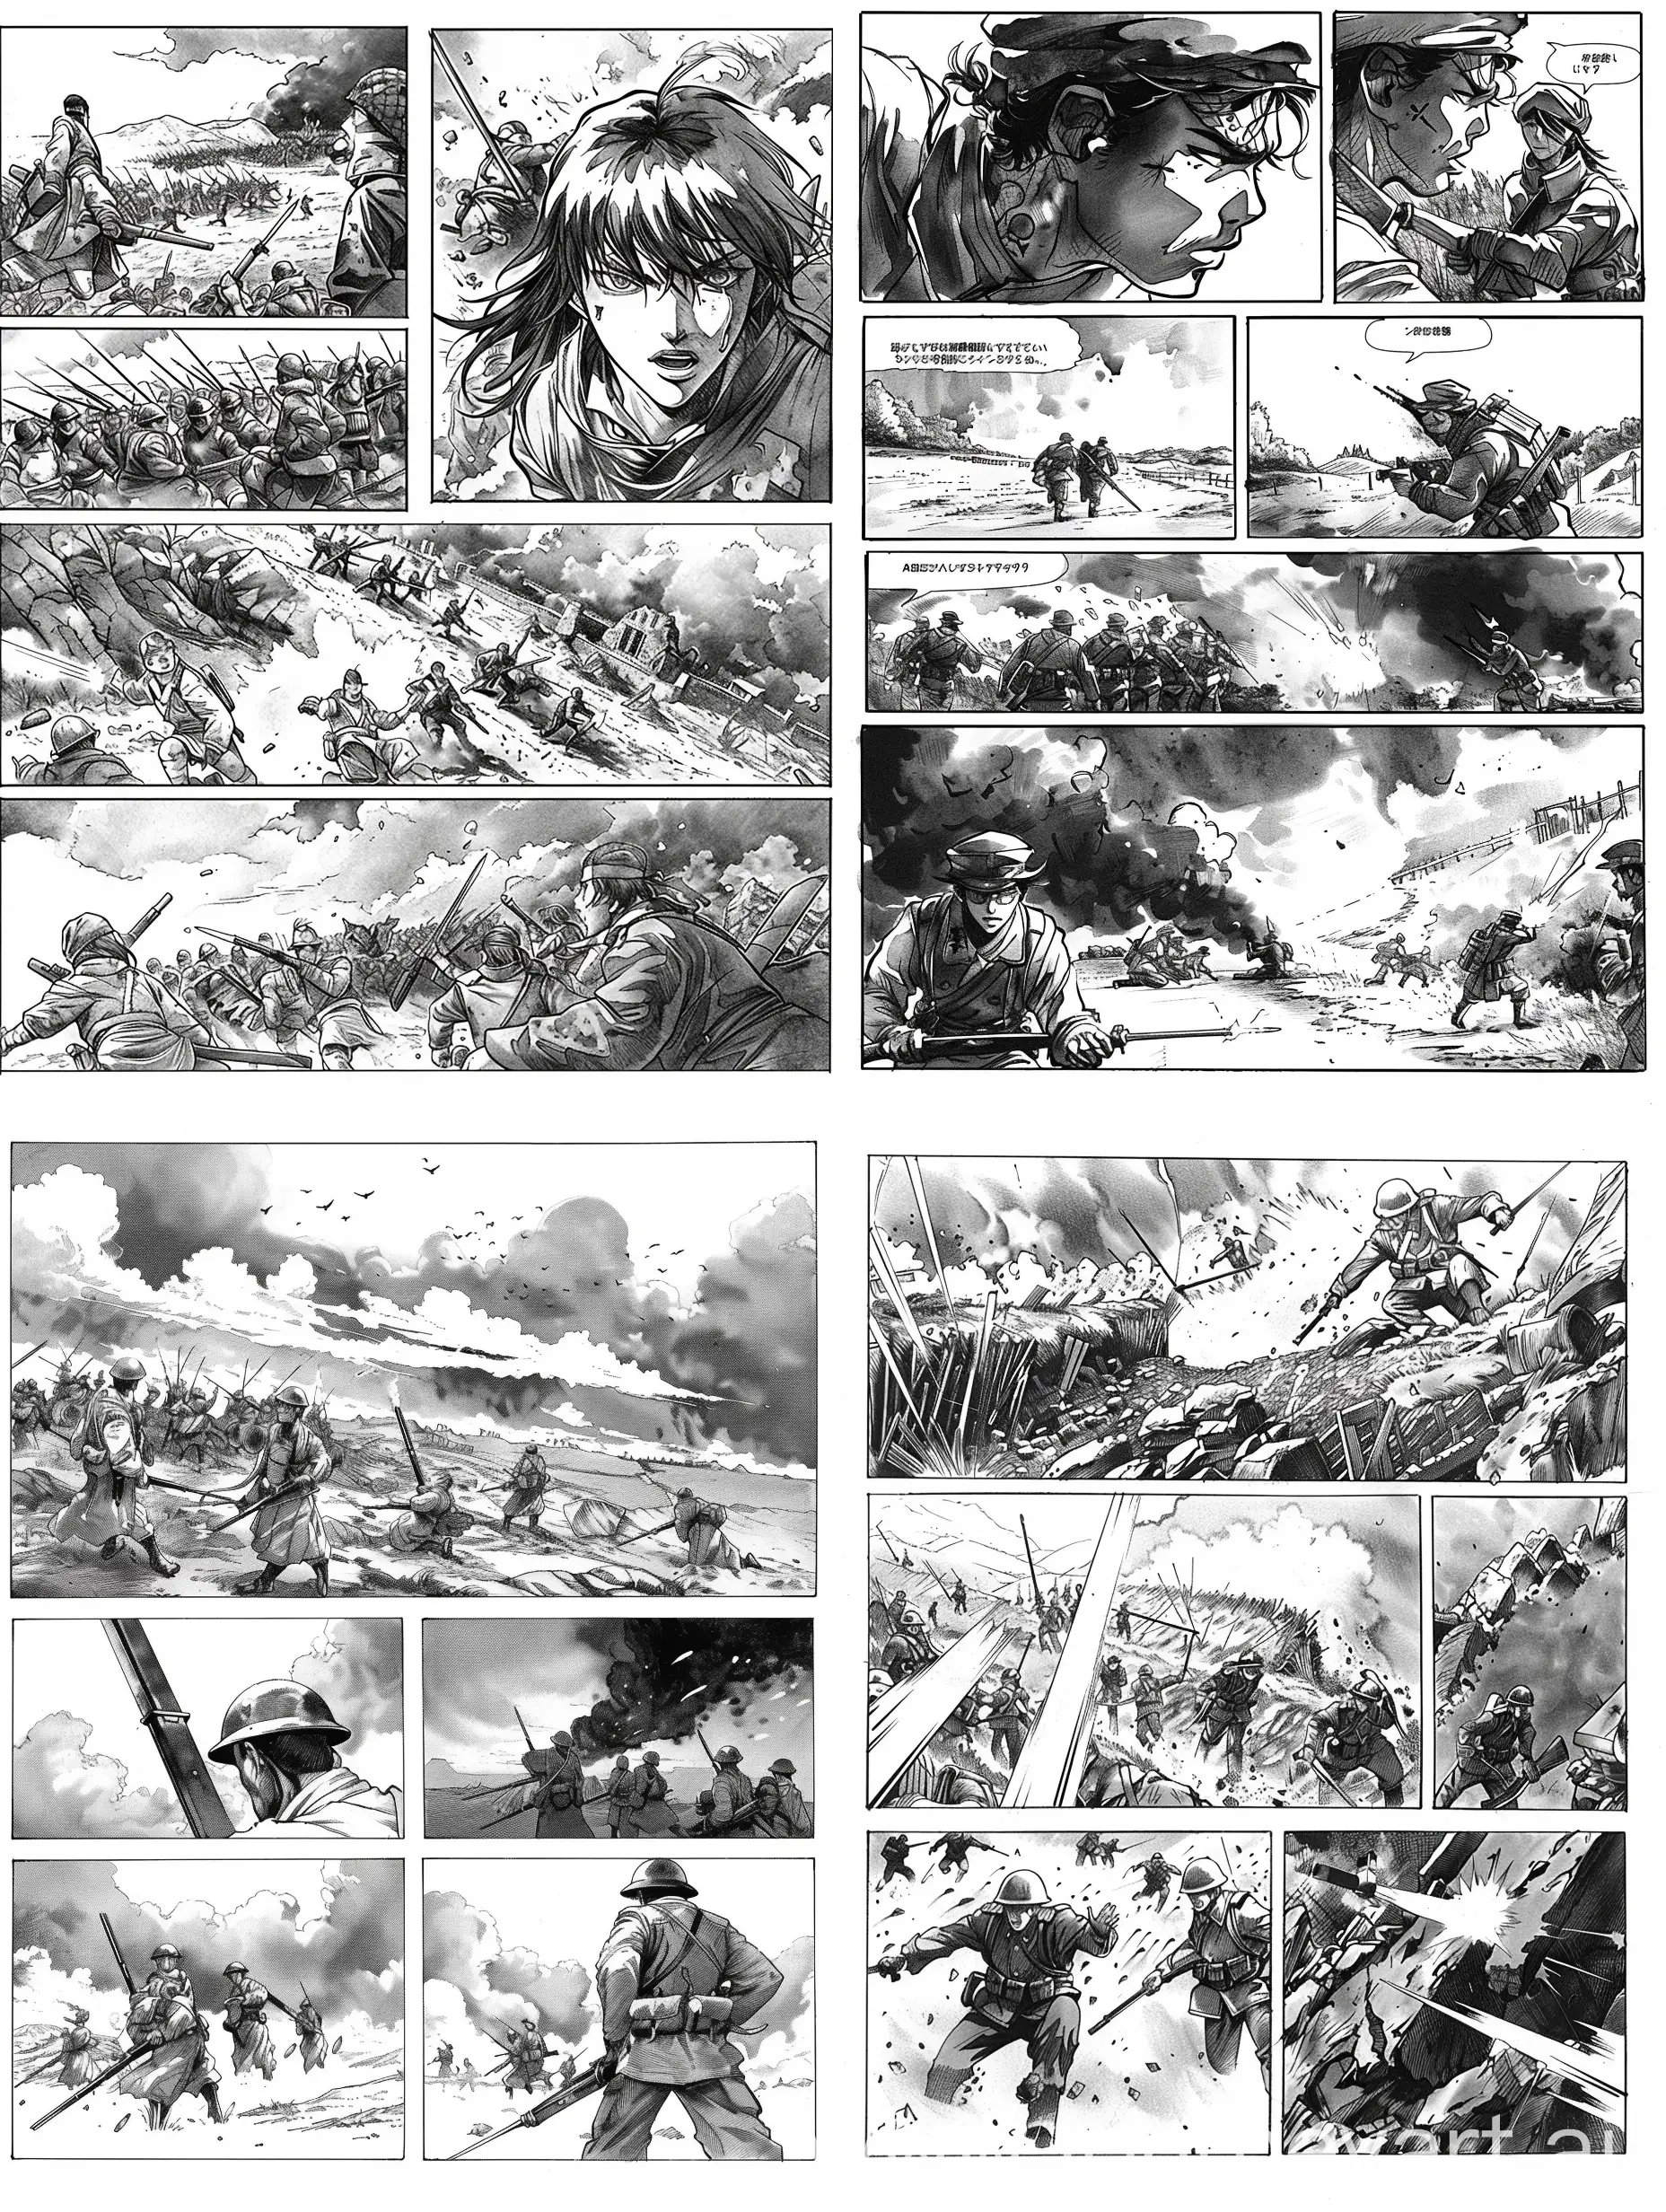 Historical-War-Scenes-Depicted-in-Anime-Manga-Style